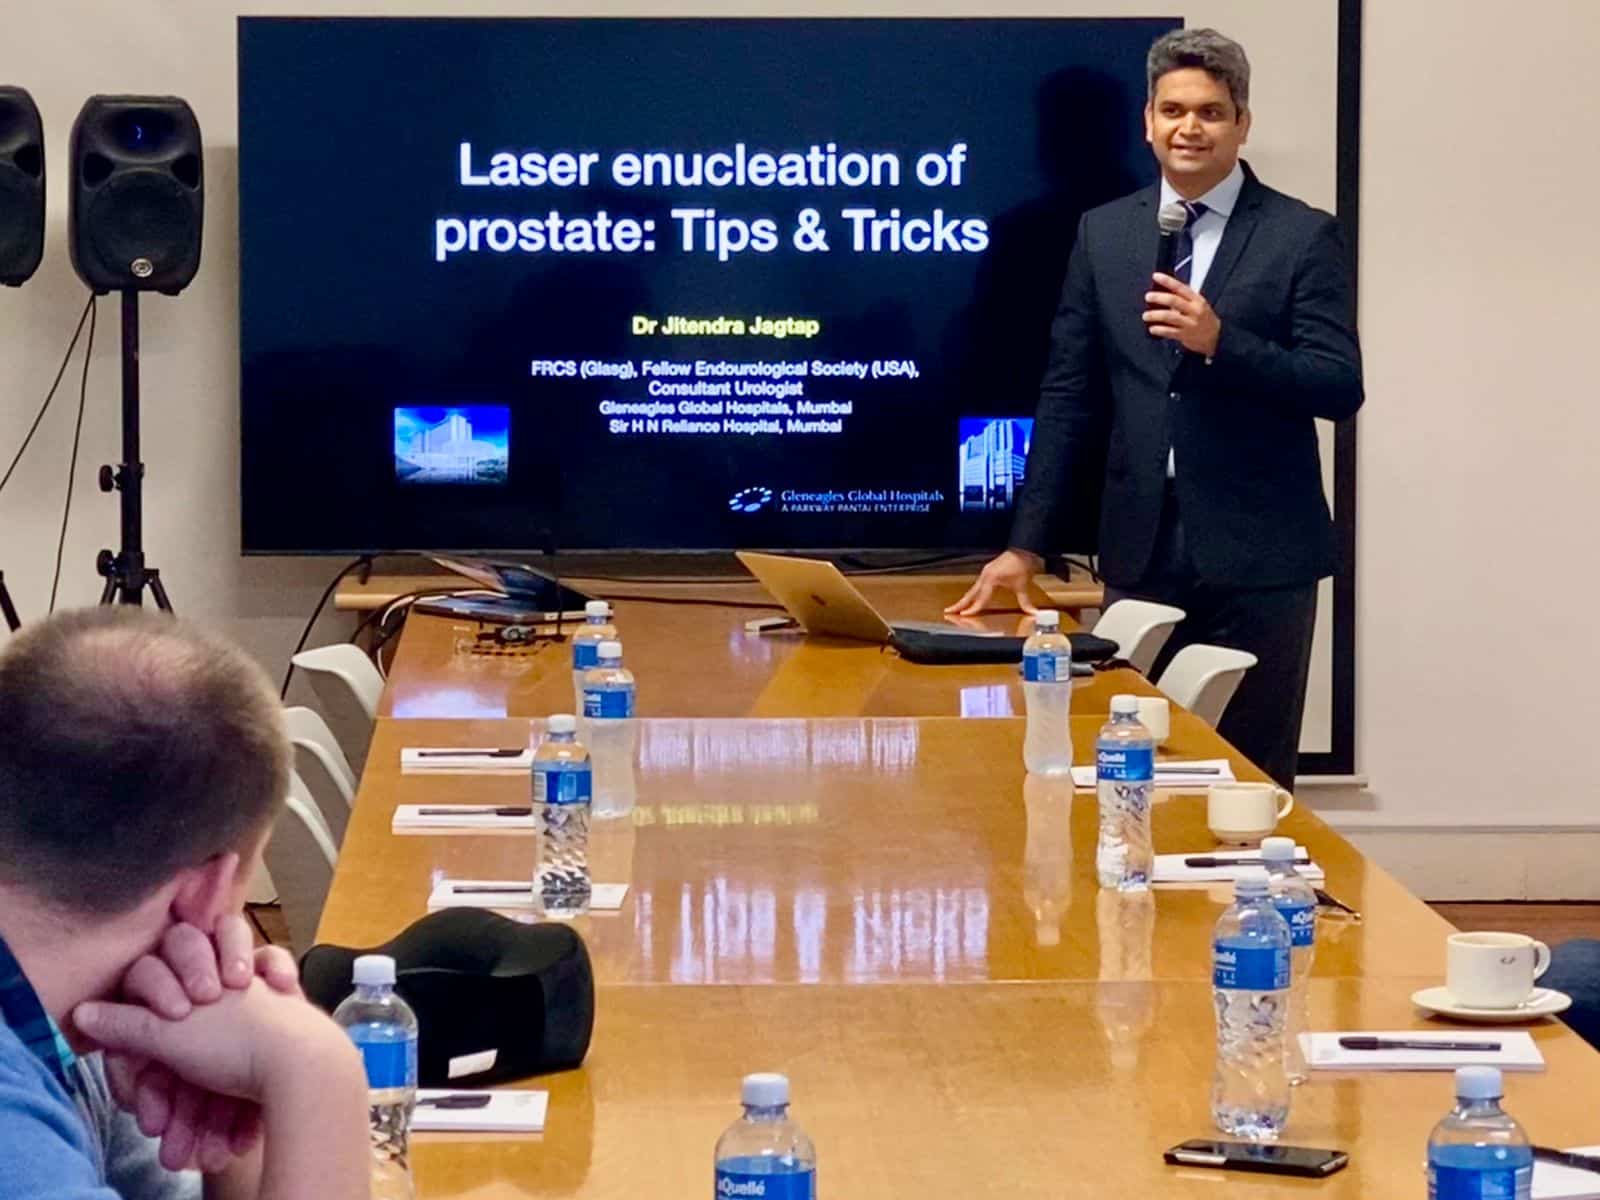 urologists on tips and tricks regarding Laser Enucleation as Day Case surgery